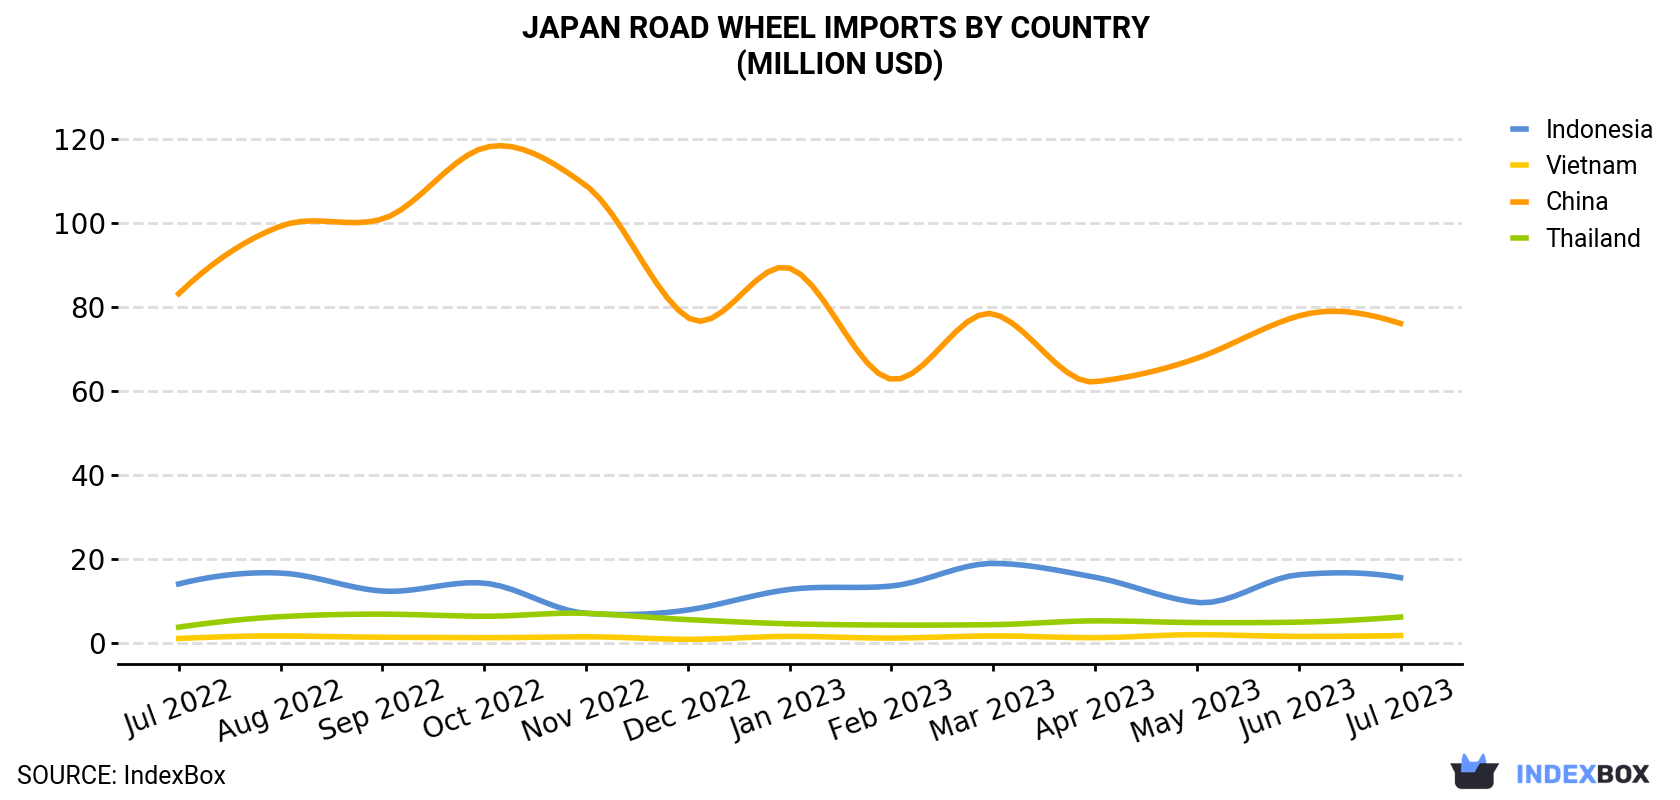 Japan Road Wheel Imports By Country (Million USD)